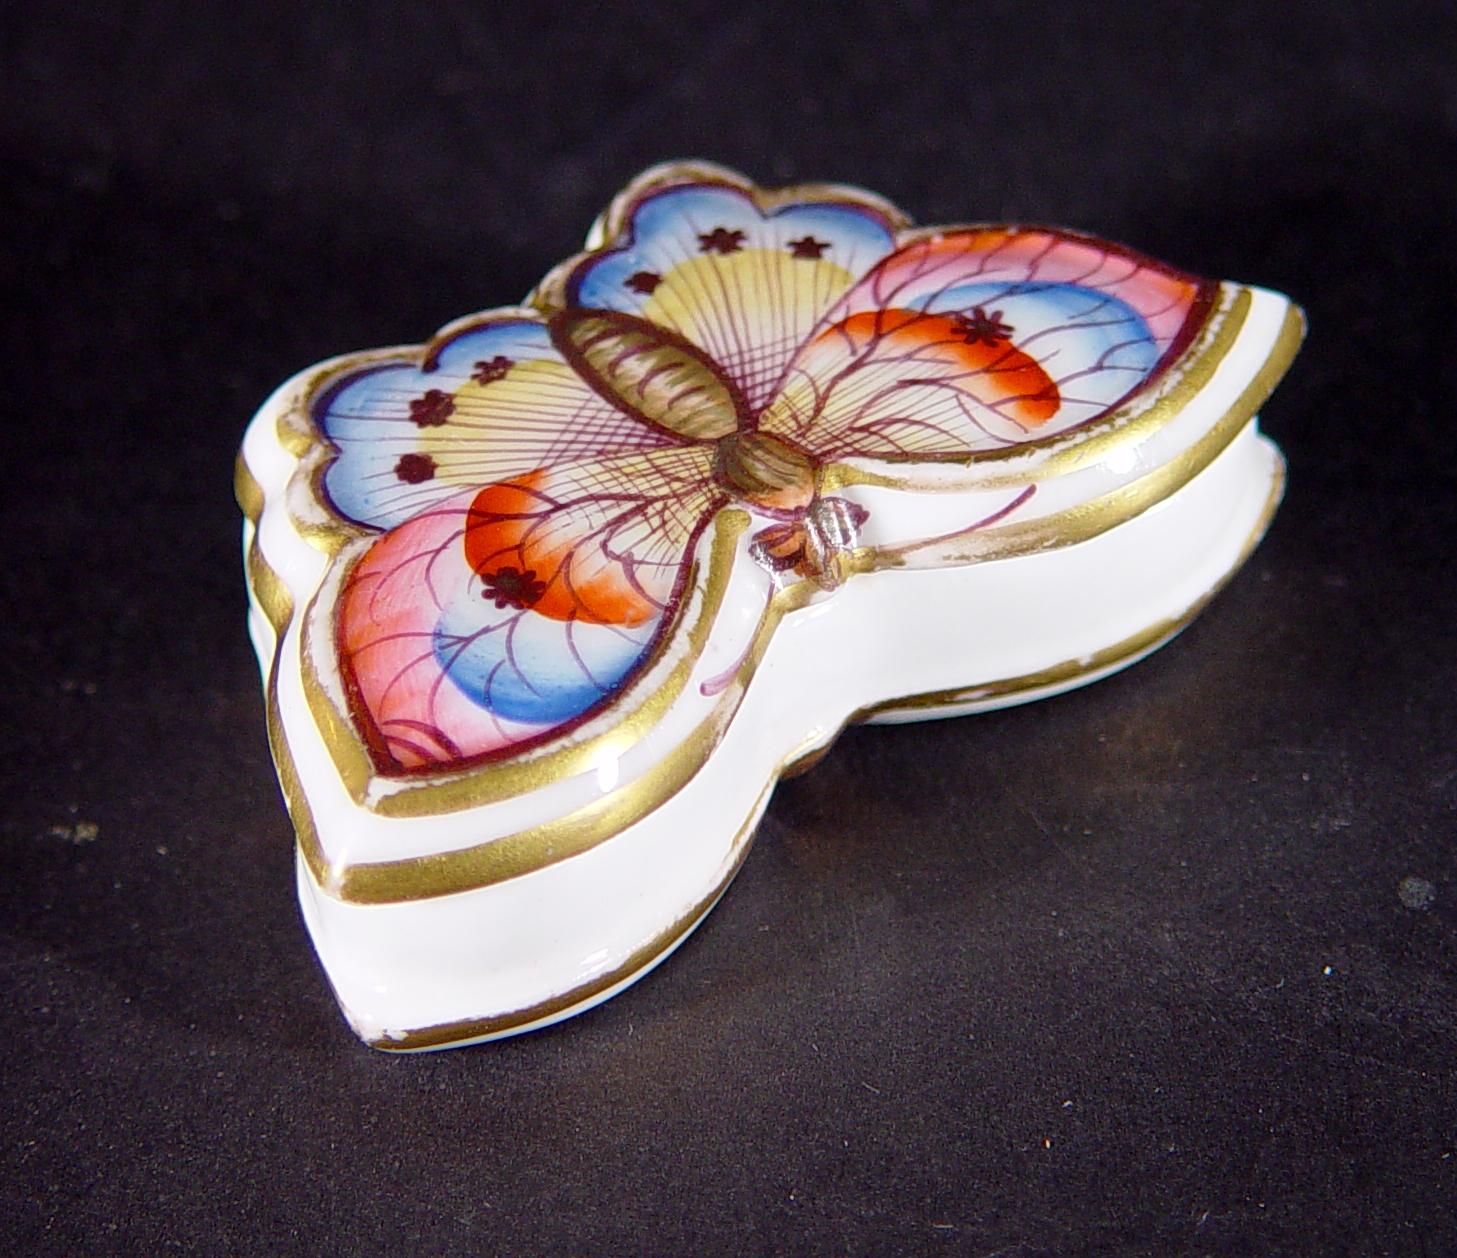 English Antique Porcelain Spode Double Sided Butterfly Box and Cover, circa 1810-1830